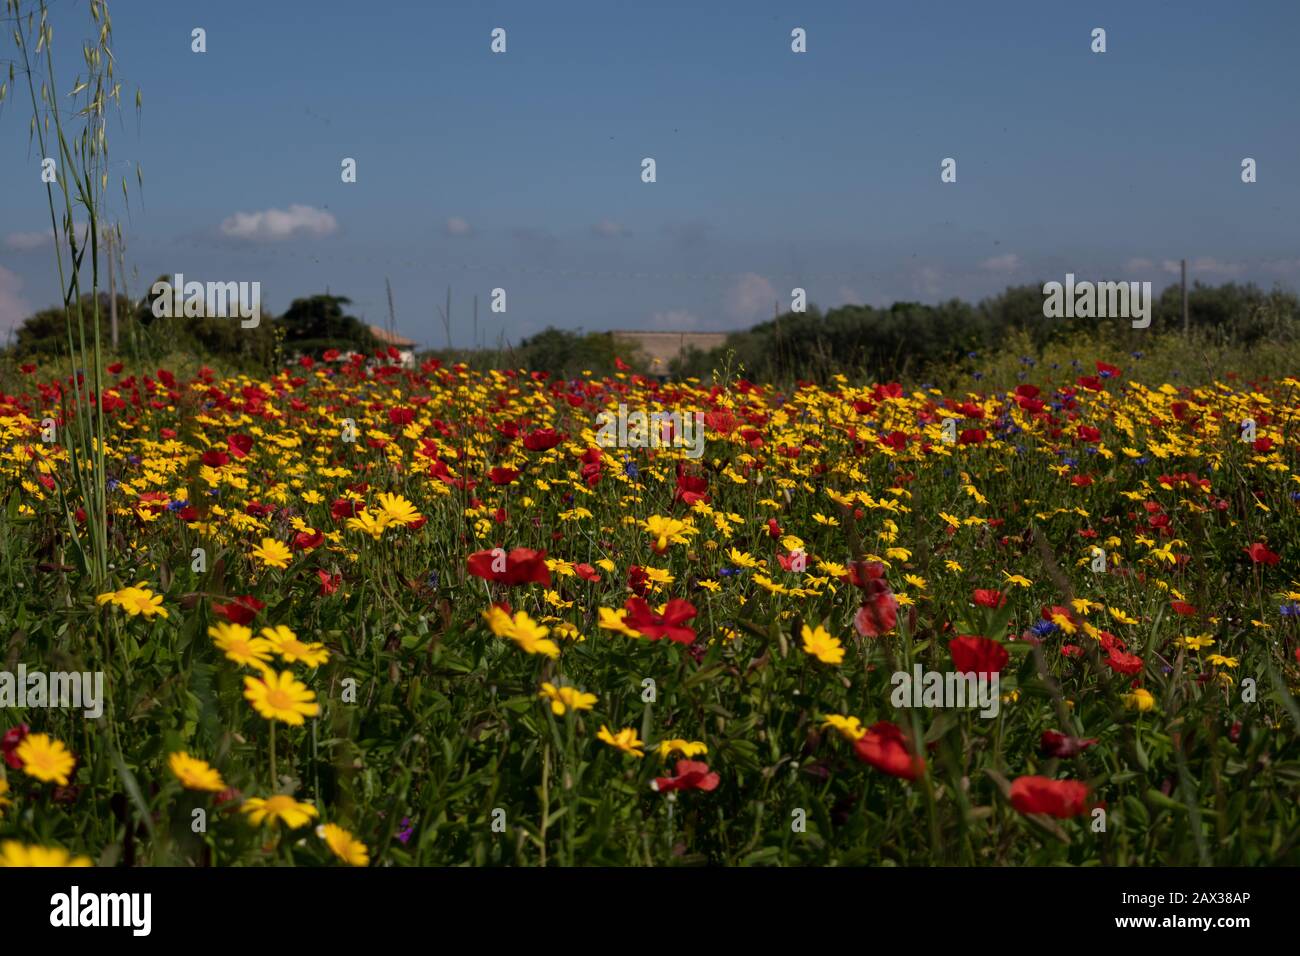 Wonderful view of vivid yellow and red wildflowers yellow and red in Tuscan countryside Italy Stock Photo